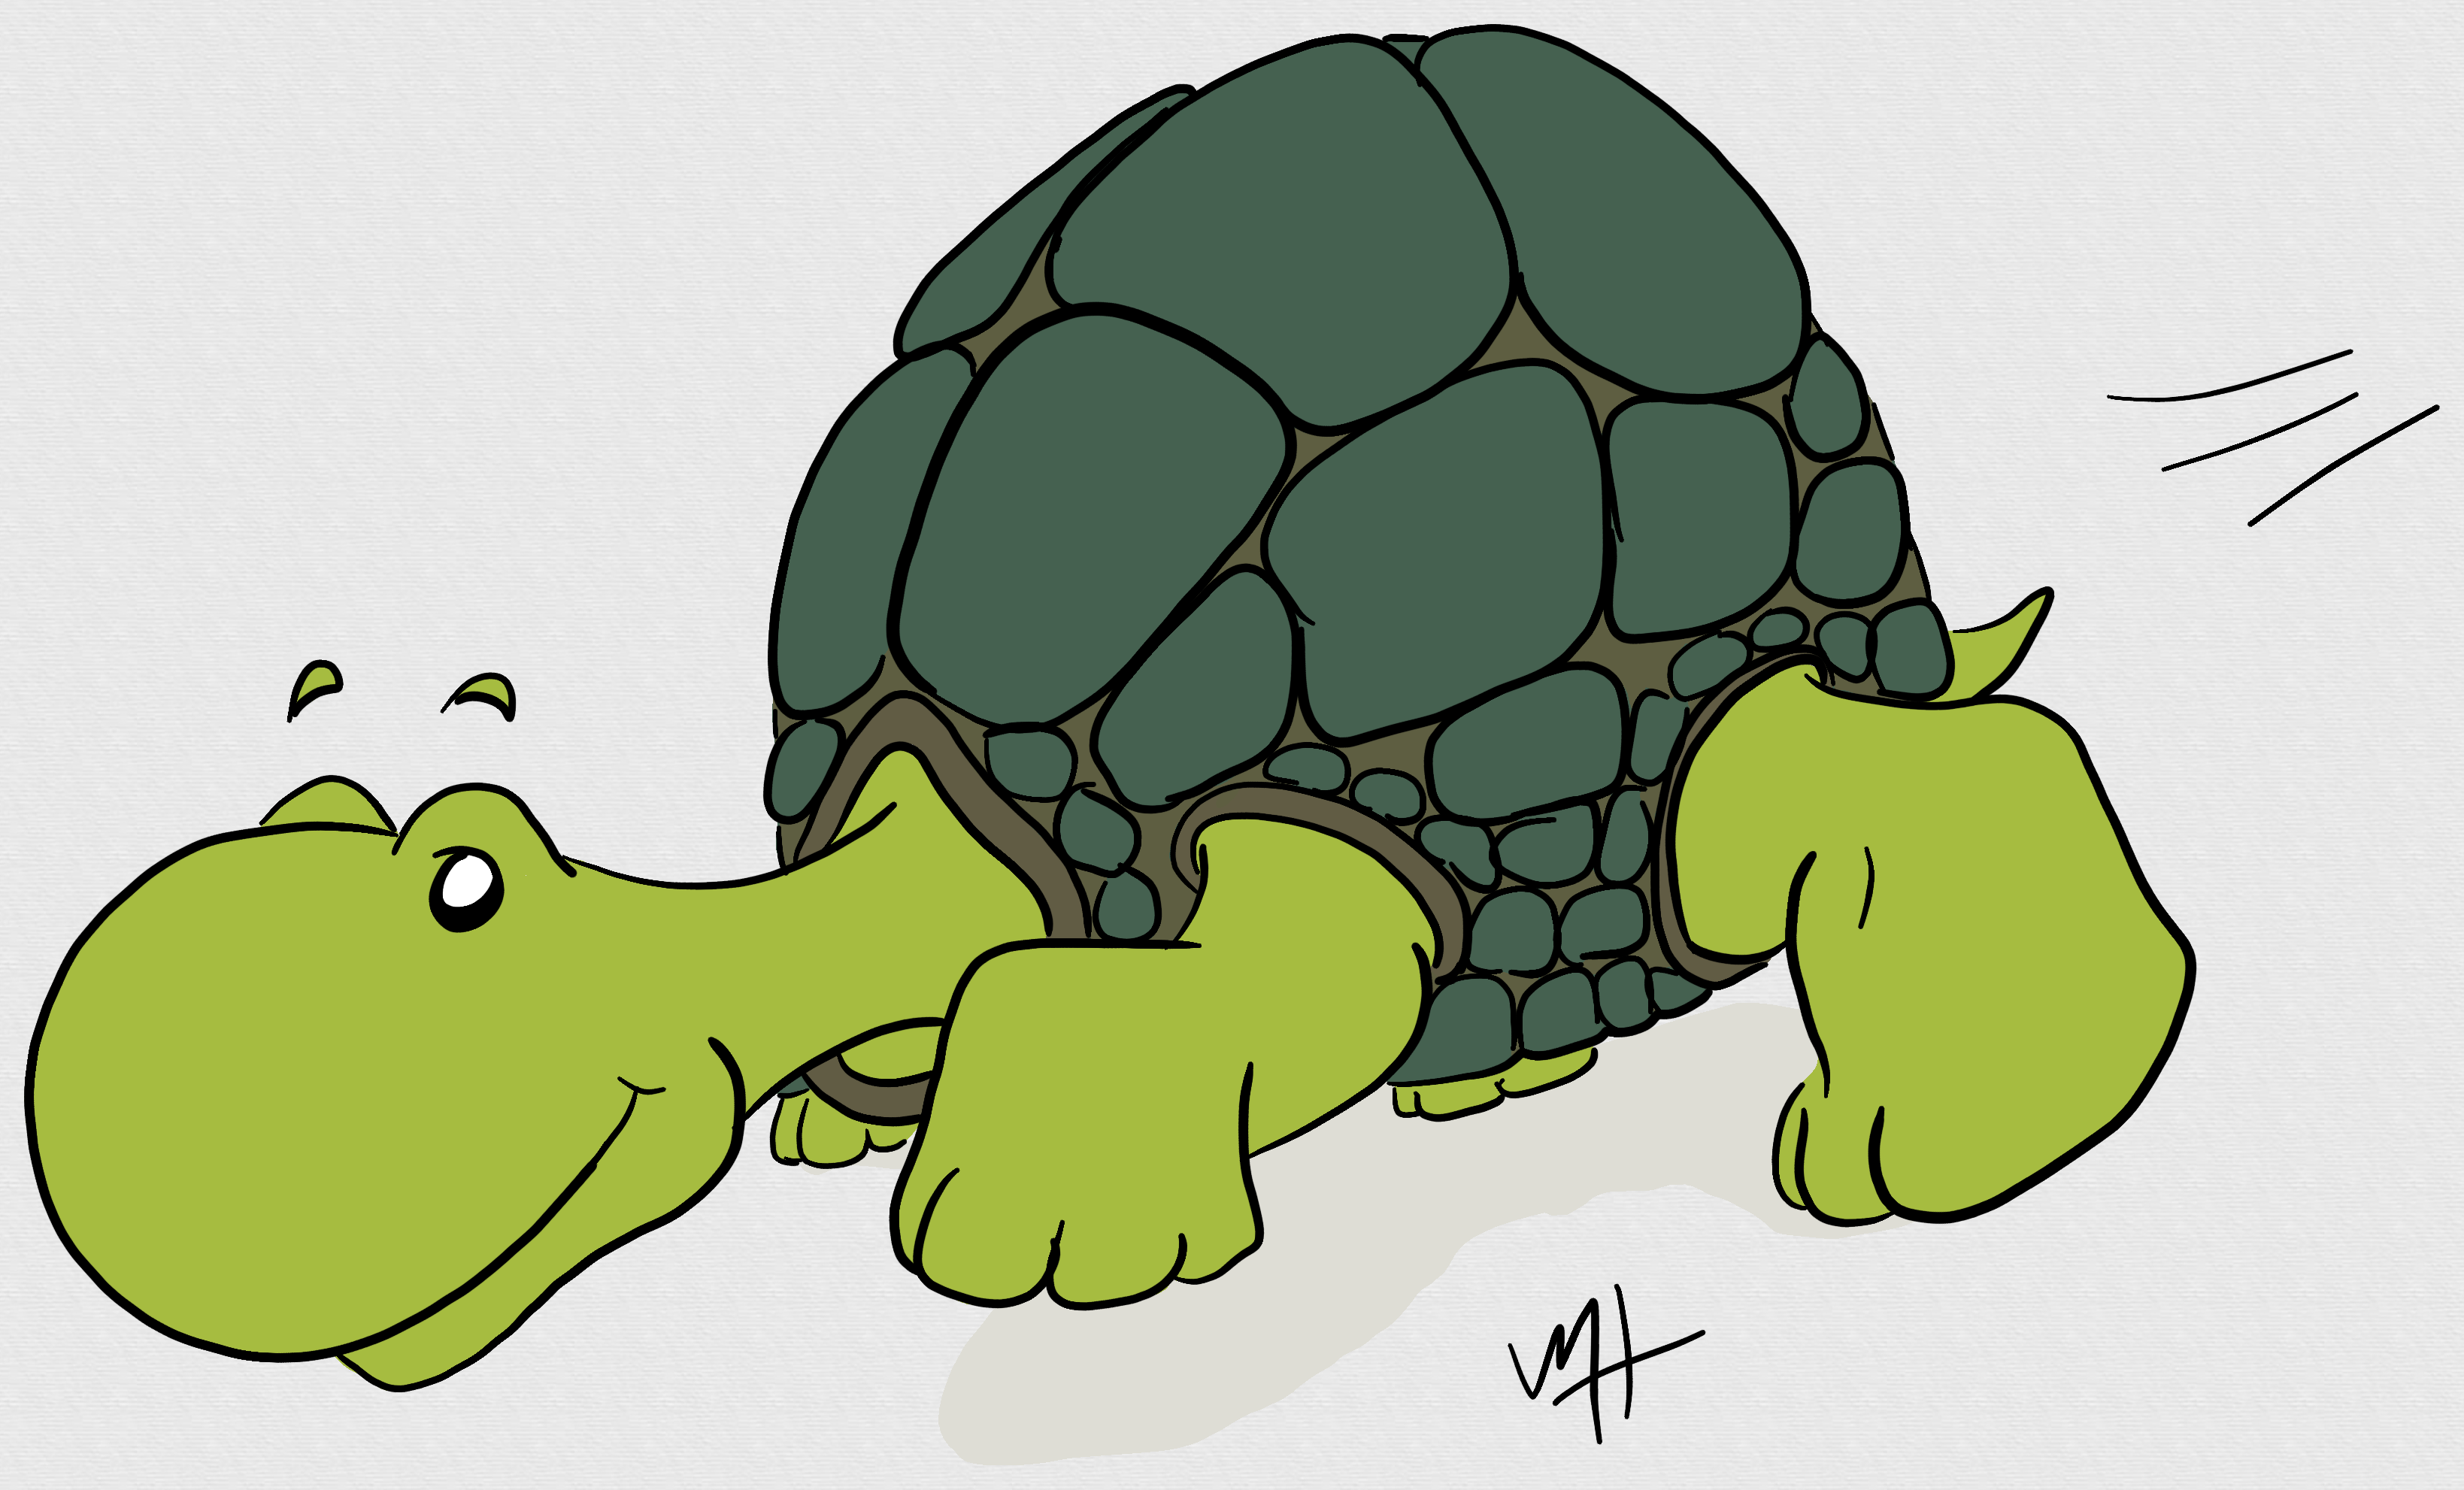 Inktober prompt: rush. A drawing of a cartoonish turtle who is...um...rushing.